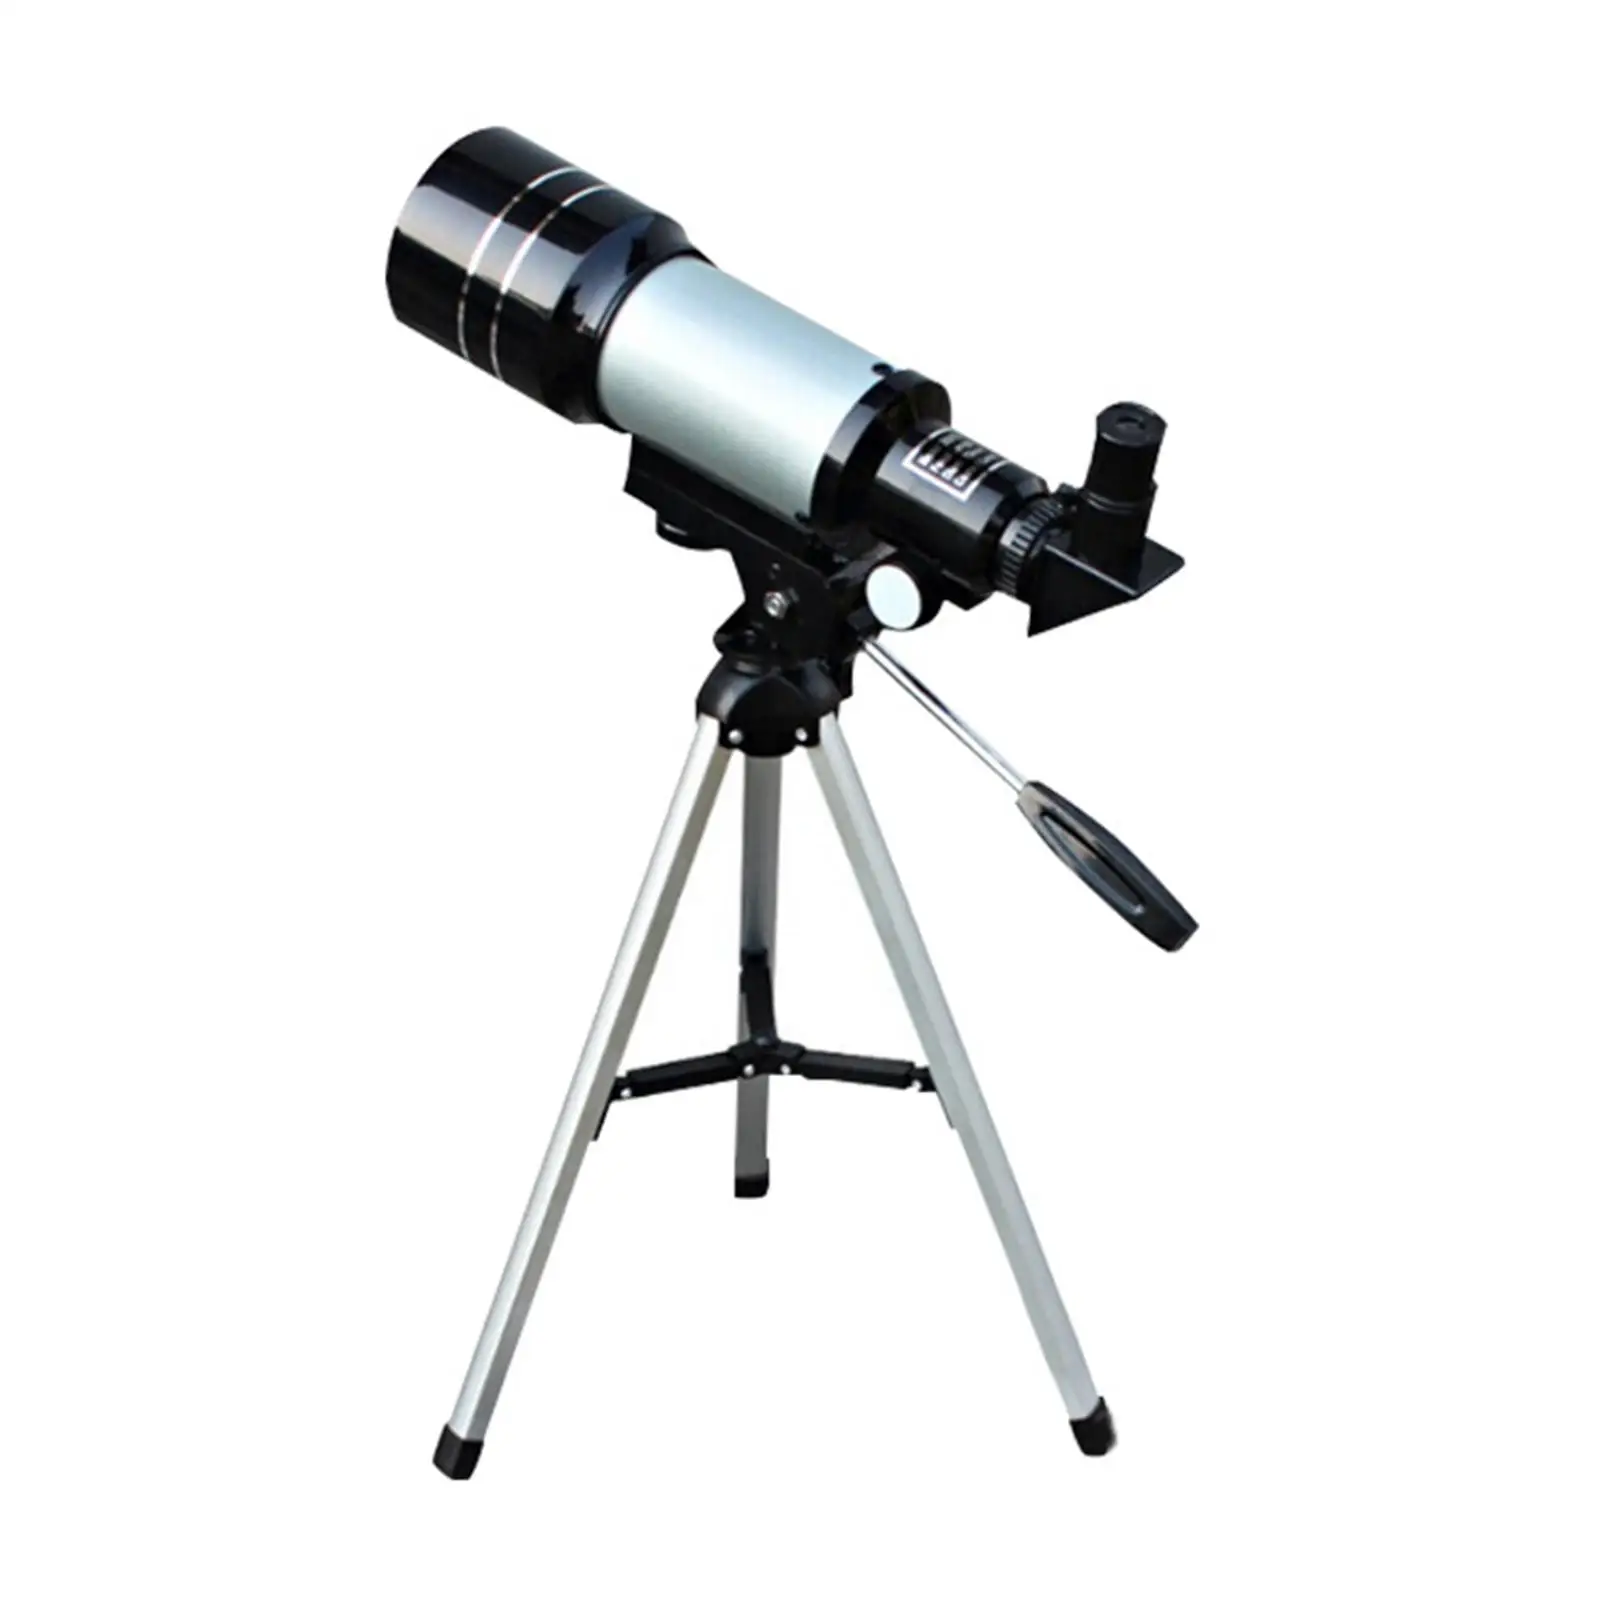 Portable 70mm 300mm Telescope with Tripod for Beginners with from 15x to 150x Eyepieces Refracting Telescope Accessory Durable